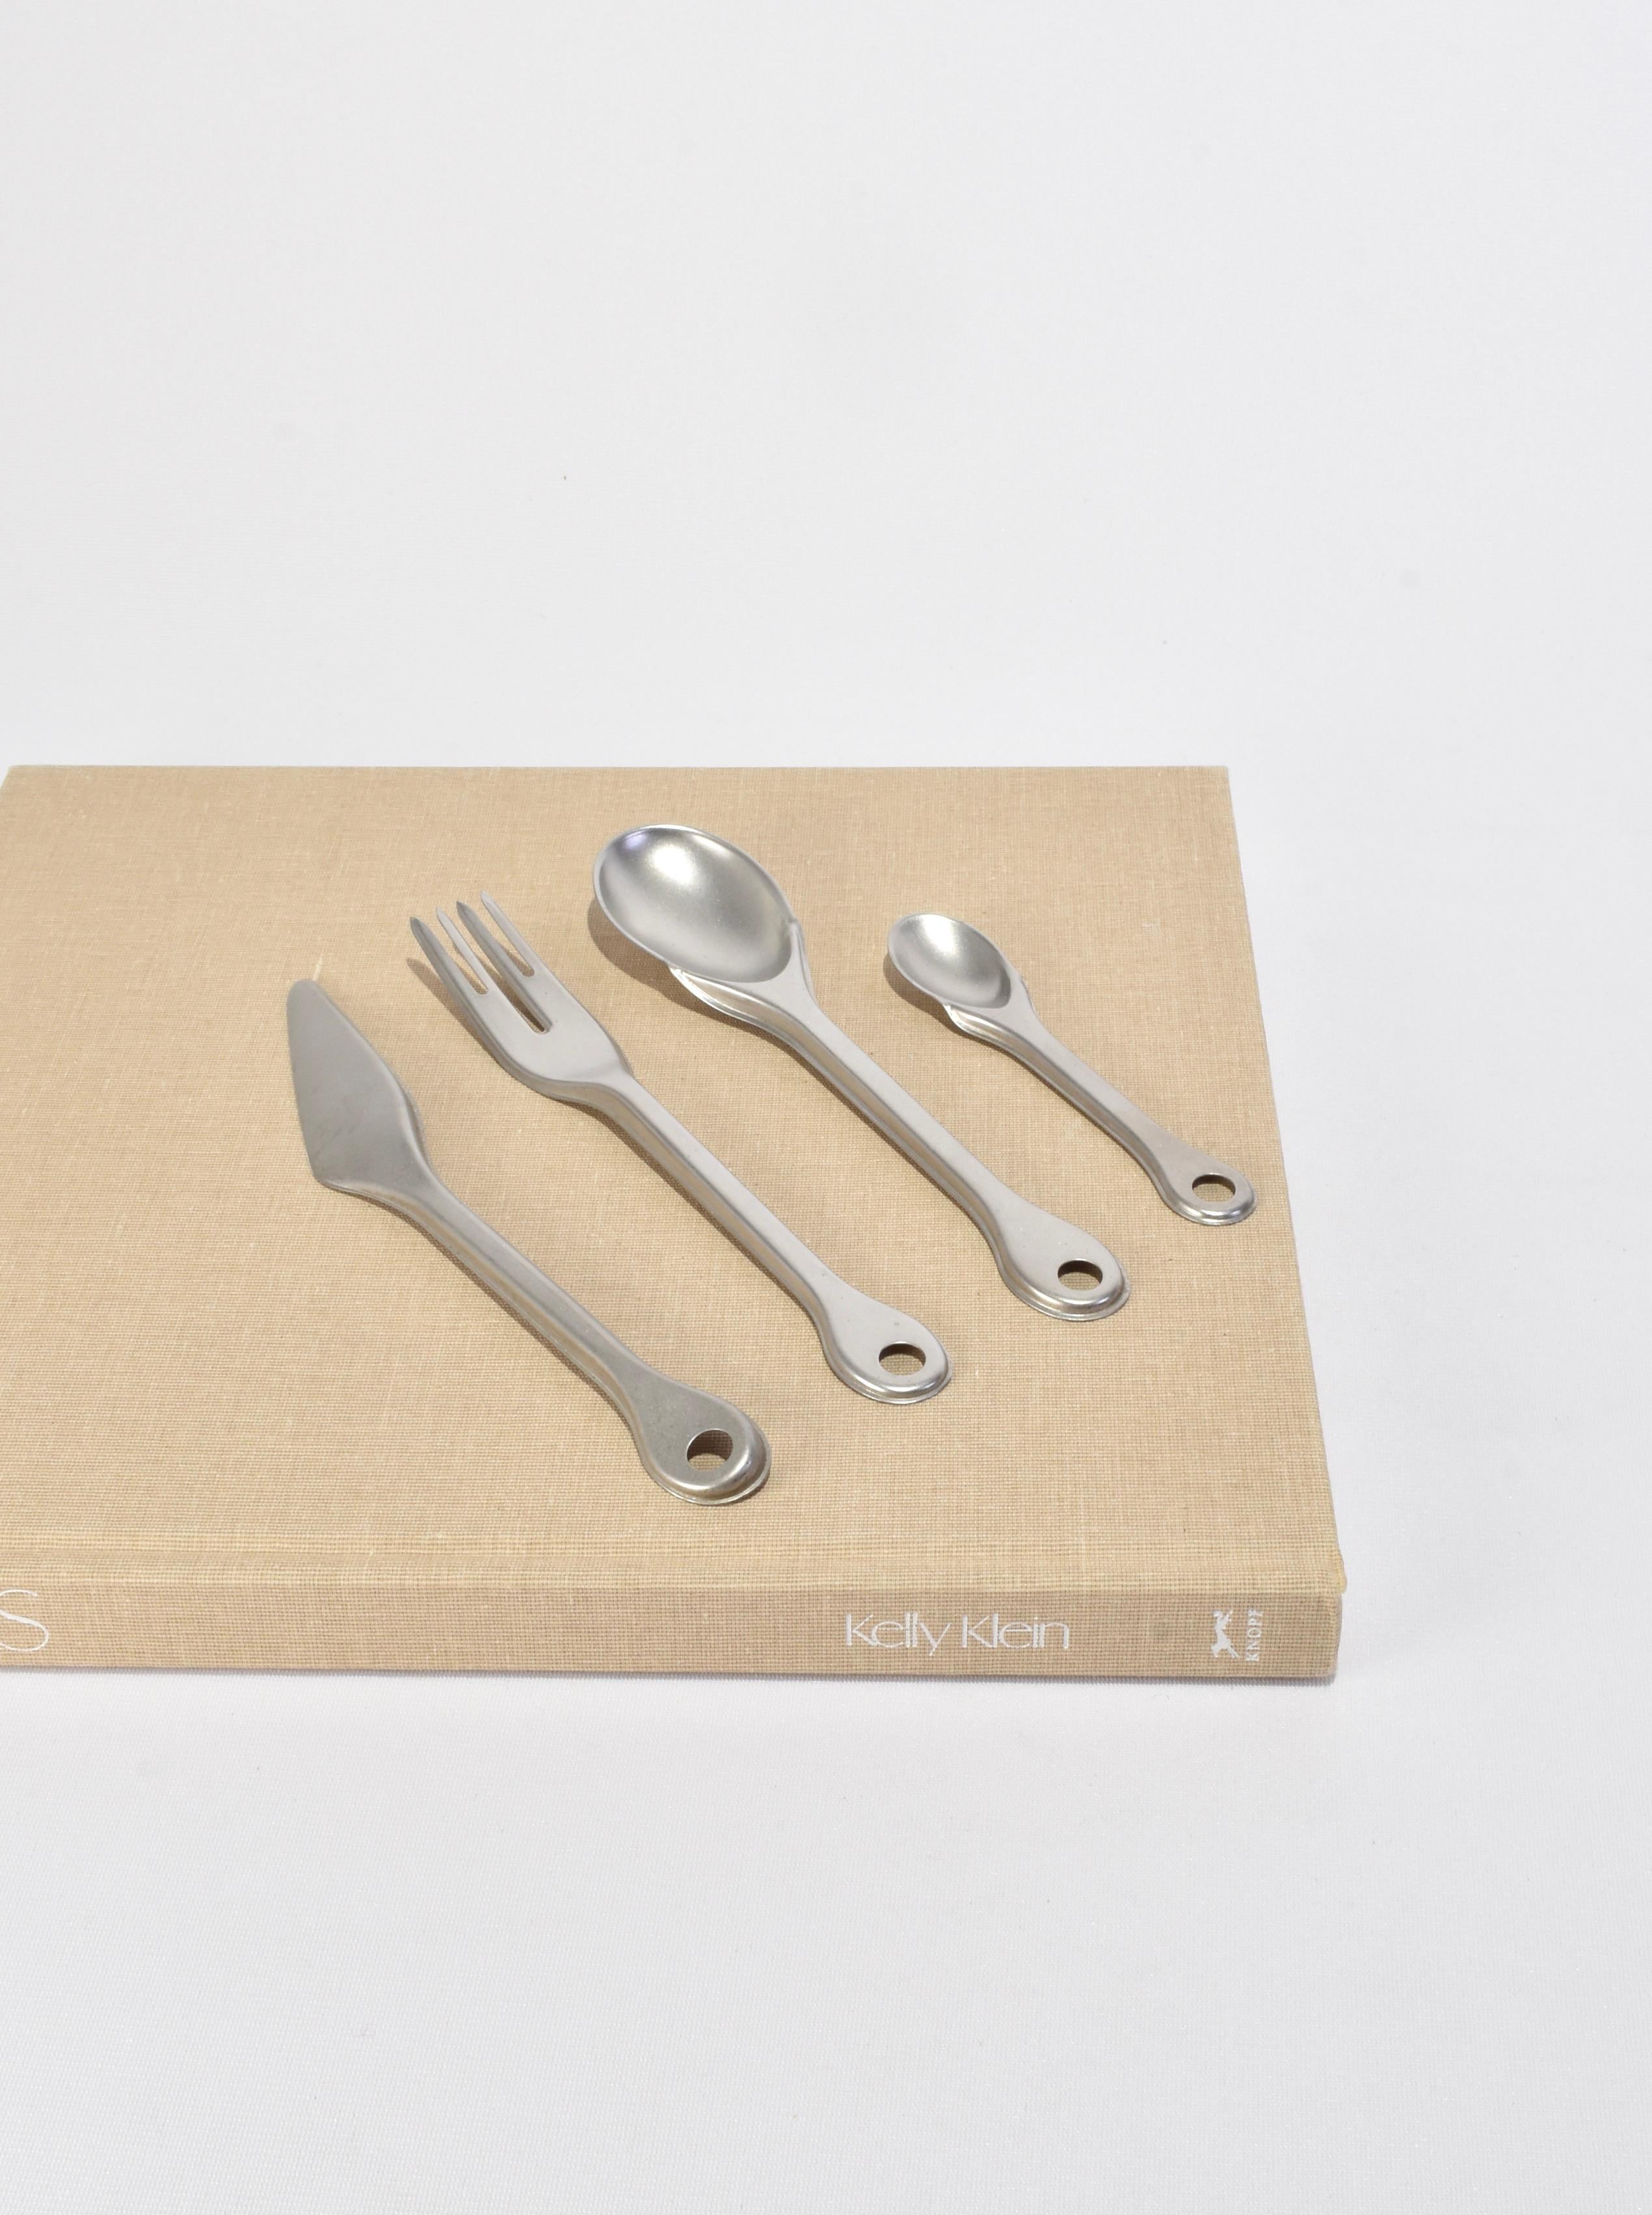 Rare, 4-piece flatware set 'Piuma' designed by Enzo Mari in 1996 for Zani & Zani Italy. Made from lightweight 18/10 stainless steel in a matte finish. Each piece is stamped Enzo Mari per Zani&Zani Italy.

Purchase includes one set of four pieces,